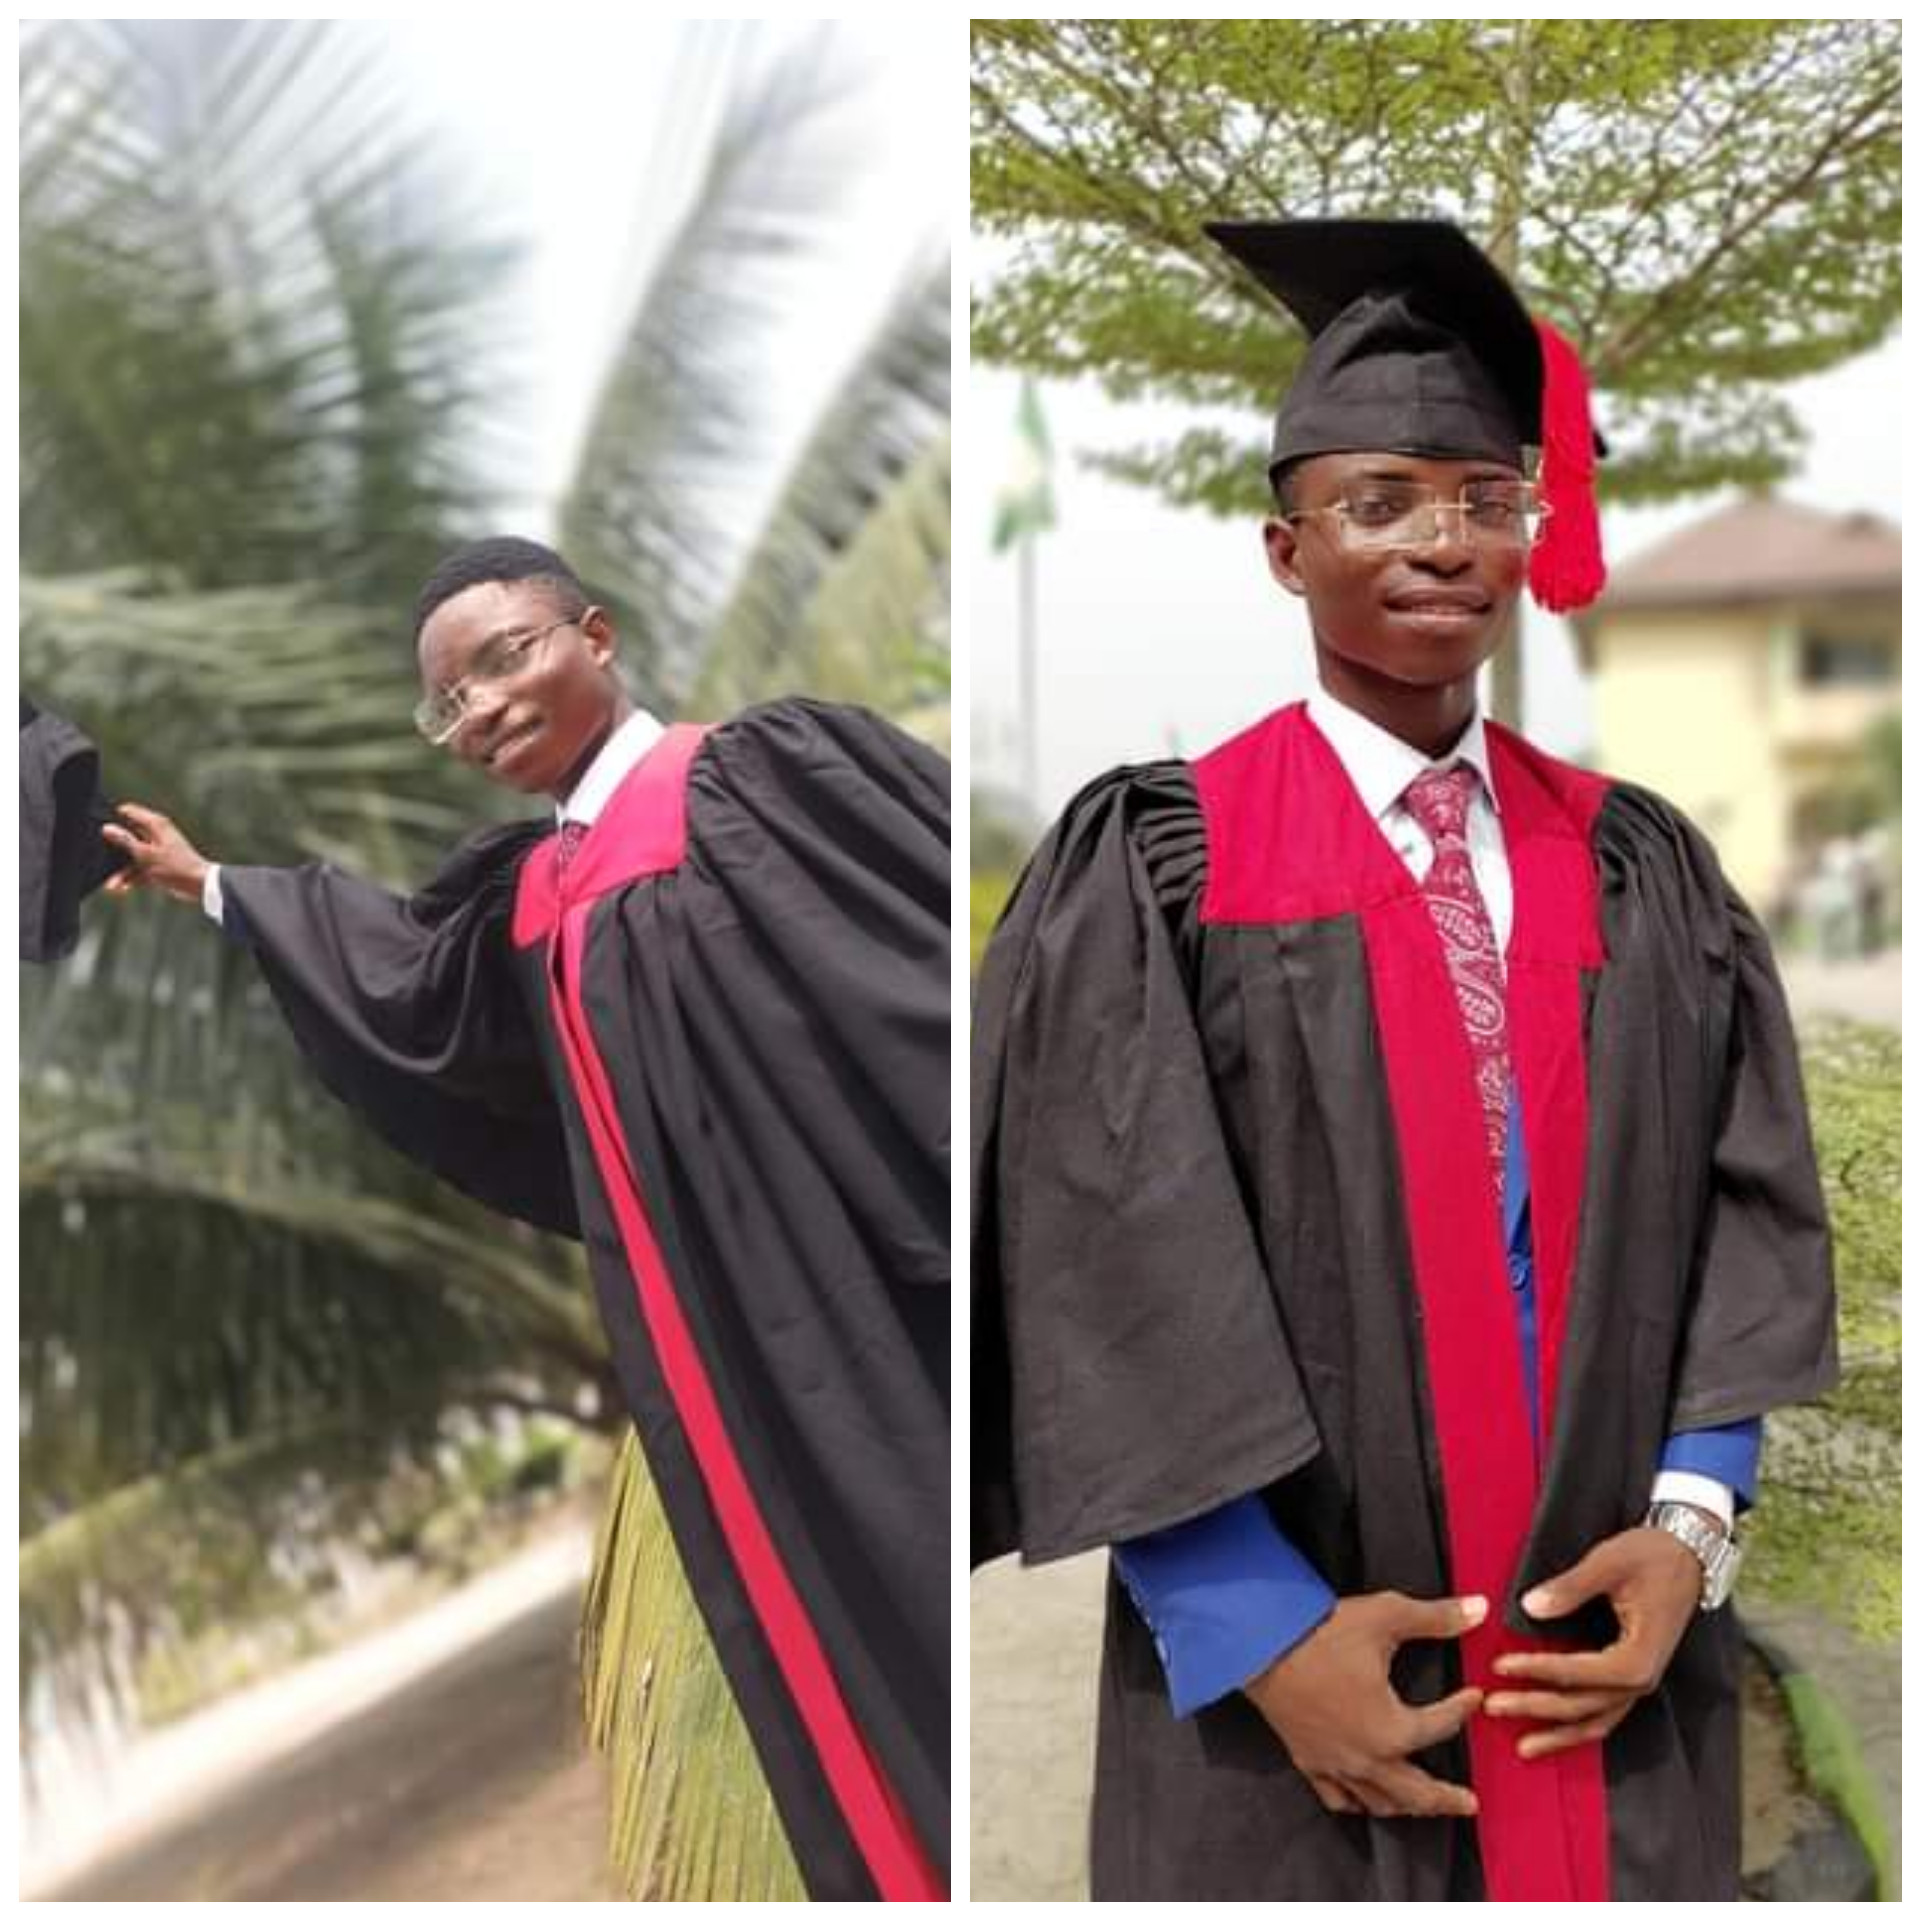 Young boy graduates as one of Akwa Ibom top students, gains admission into university to study Engineering 8 years after he was accused of being a witch